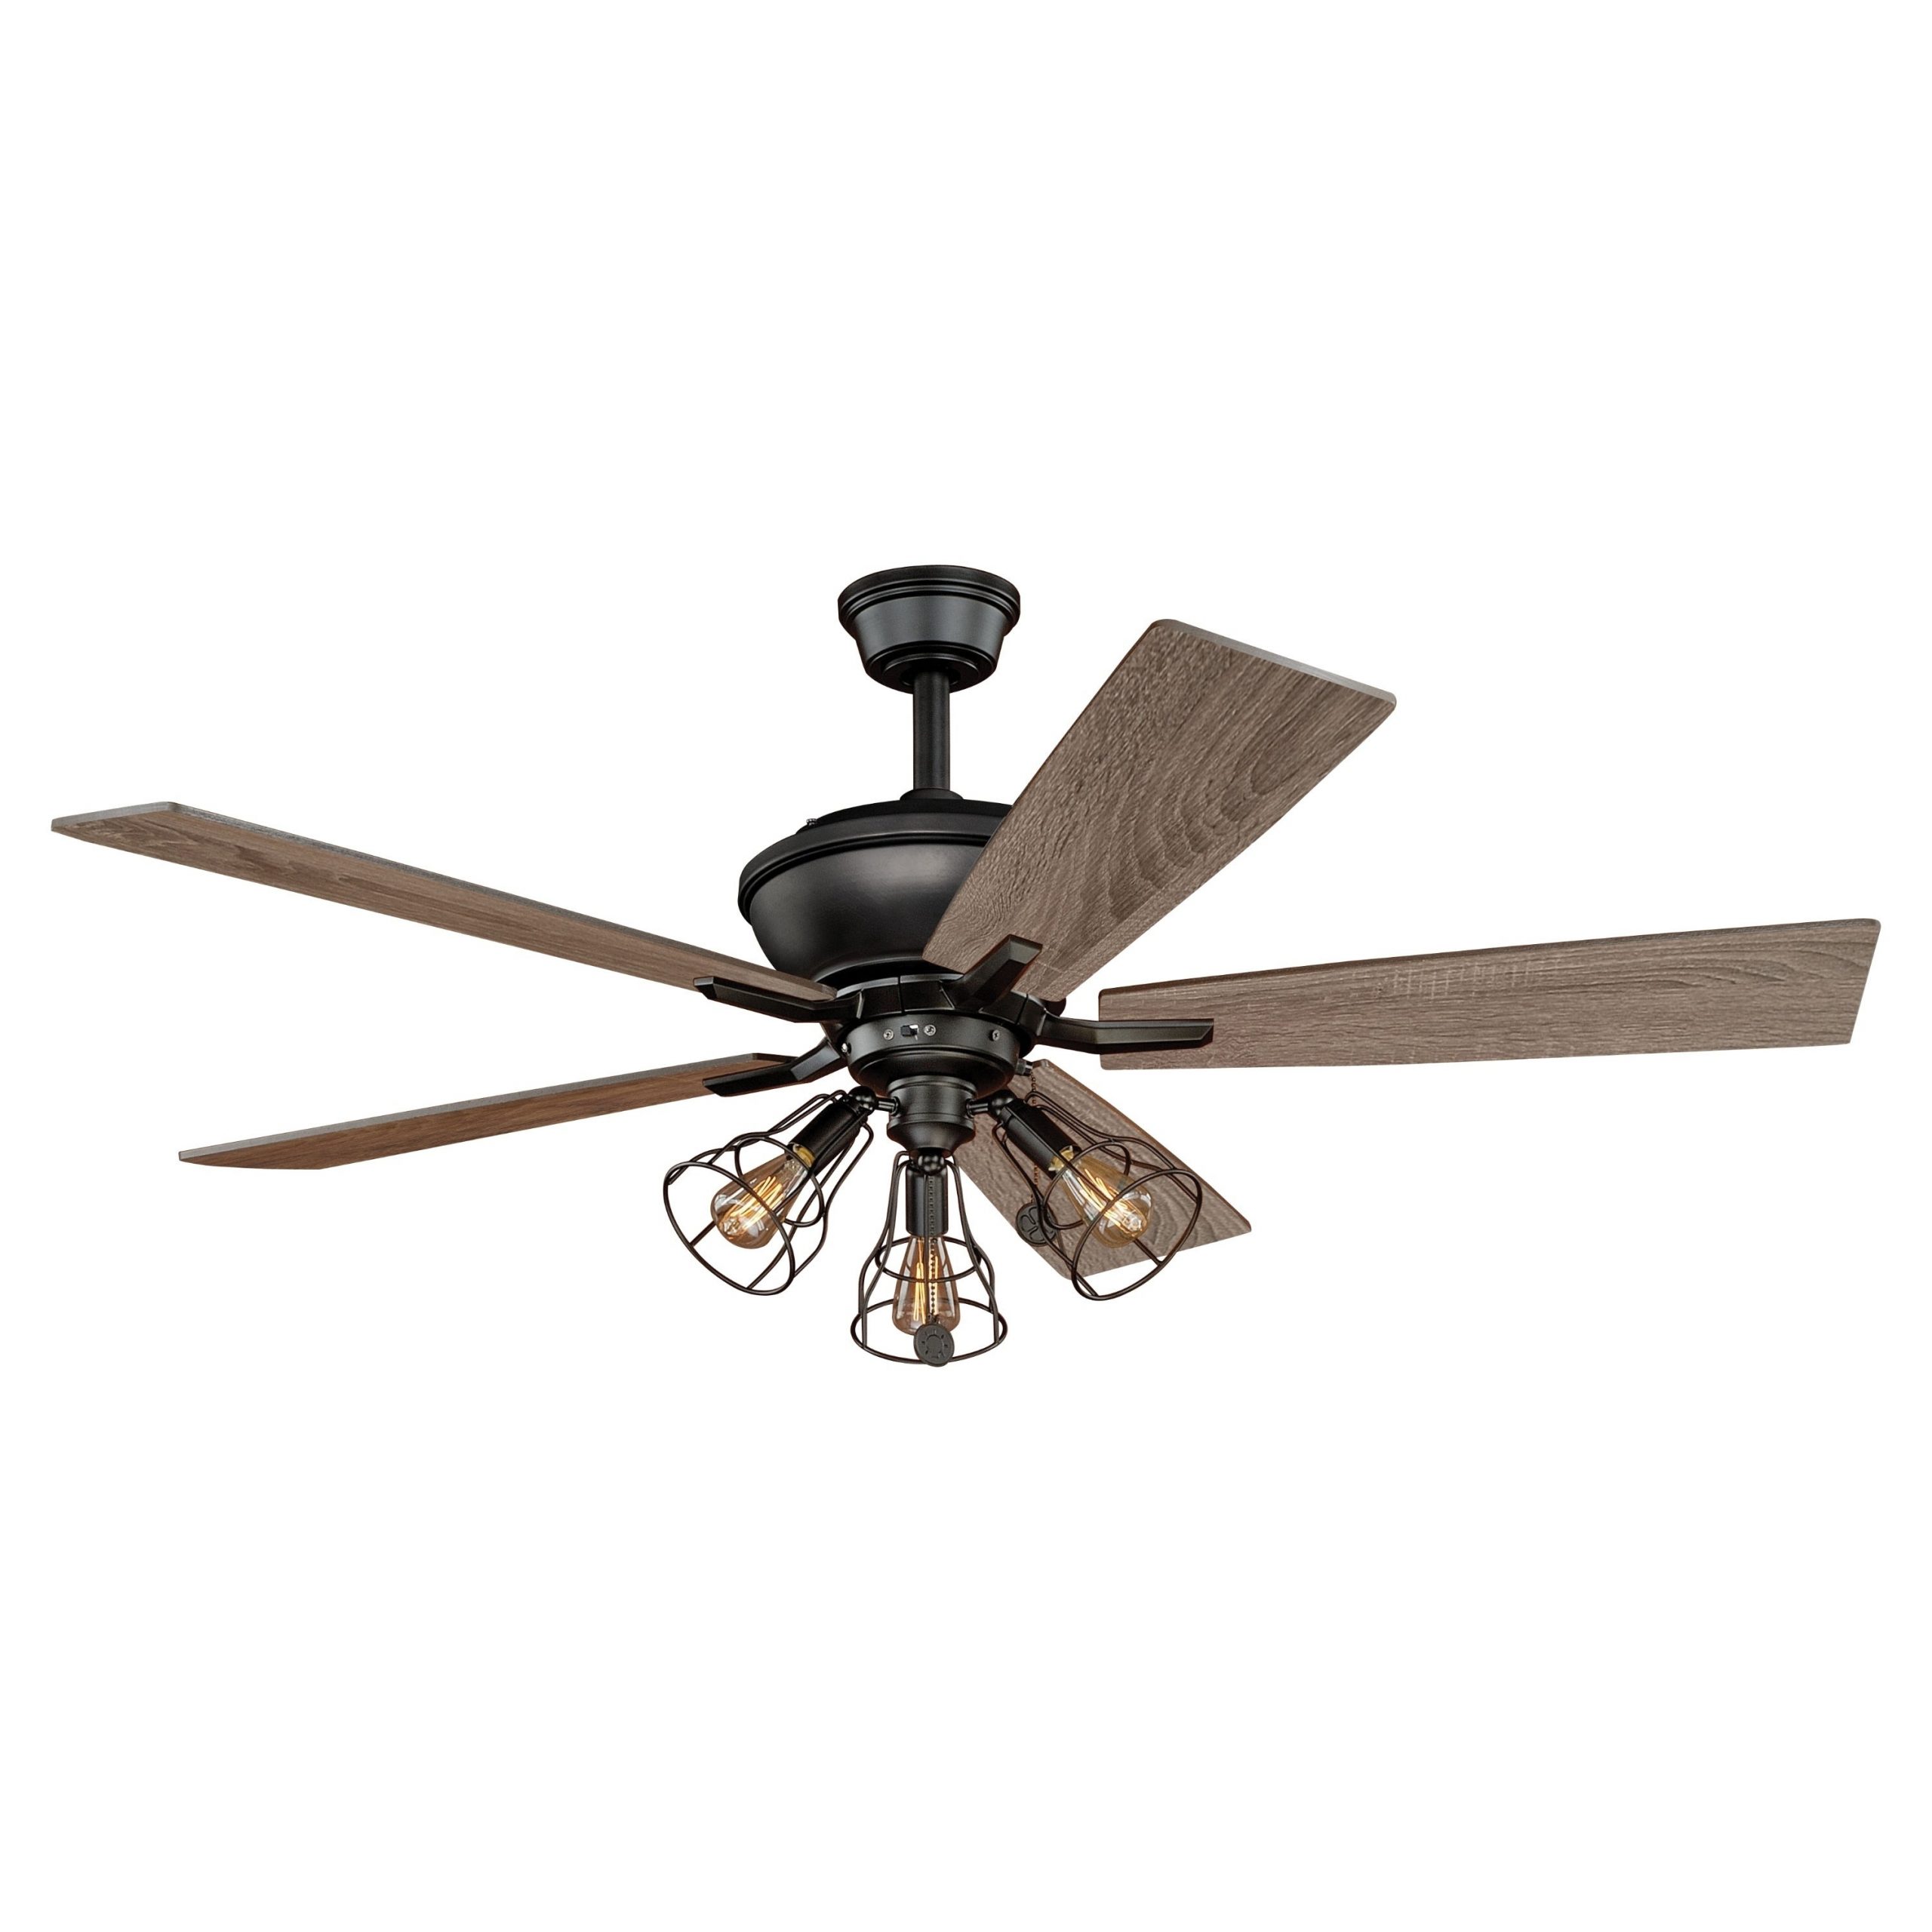 Clybourn Farmhouse Industrial 52 Inch Bronze Ceiling Fan With Wire Cage Led Light Kit 52 In W X 21 In H X 52 In D in proportions 3000 X 3000